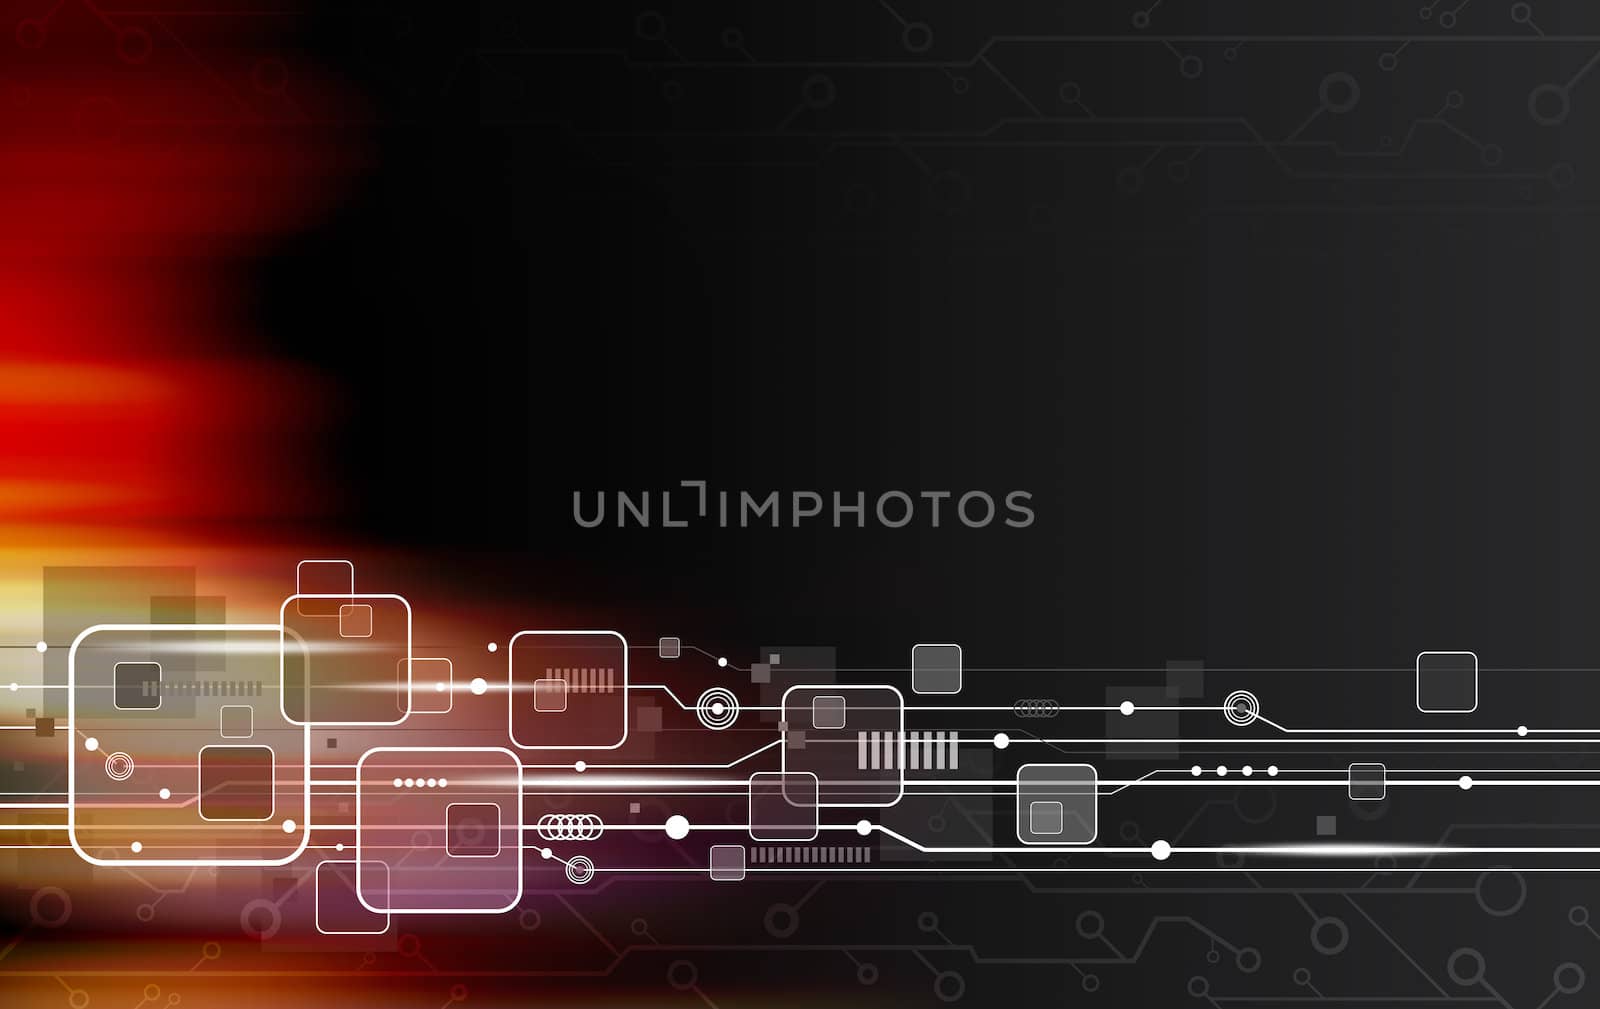 Technology background design by Myimagine